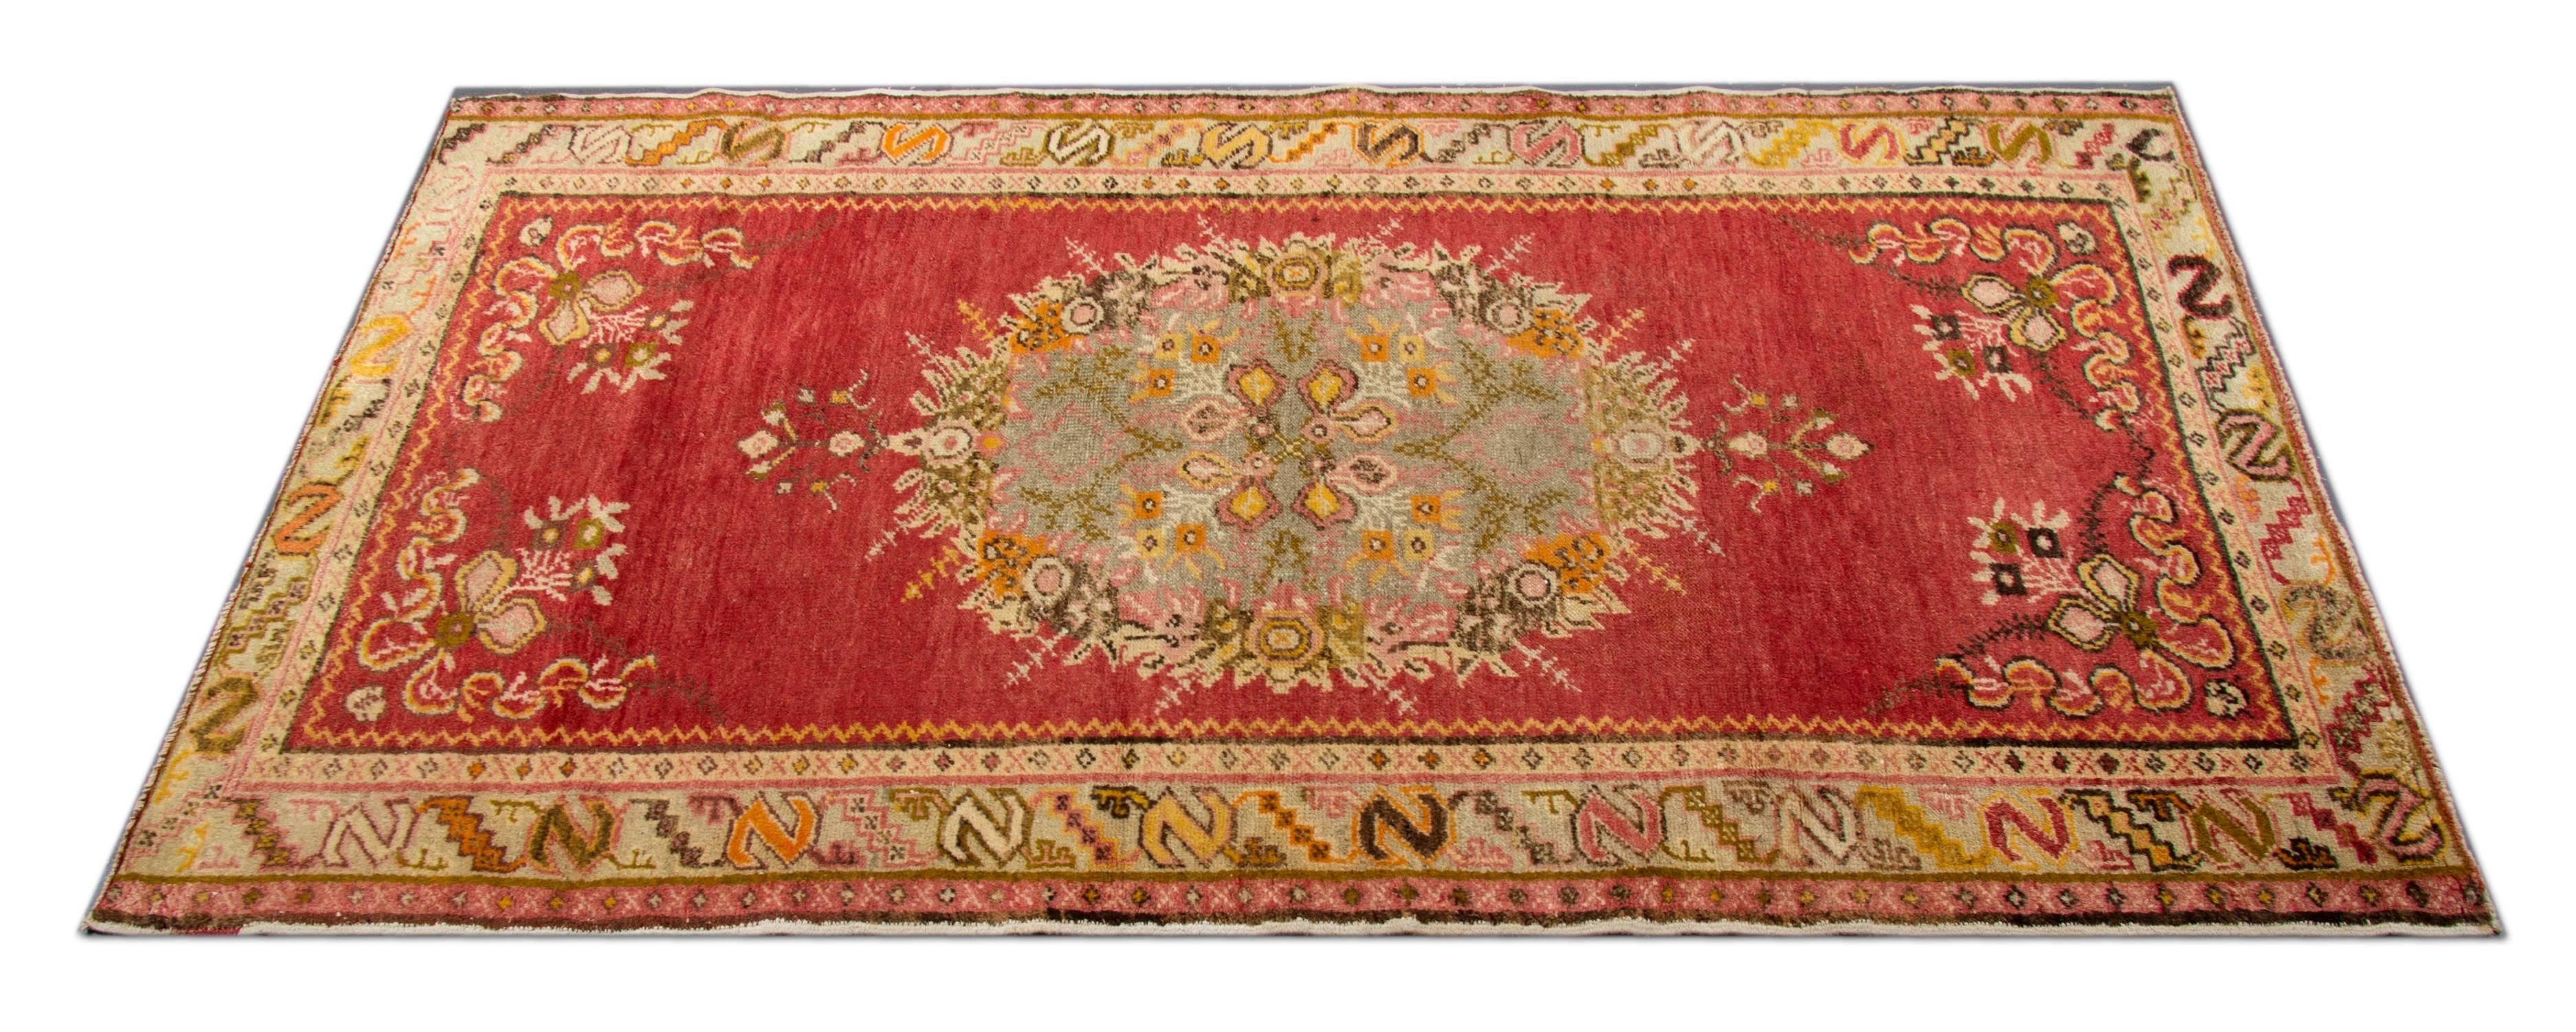 These handmade carpet luxury rugs look beautiful and would stand out as dining room rugs or bedroom rugs as an interior design object. These washable rugs are one of a kind and cannot be found in every rug warehouse or rug store. This oriental rug